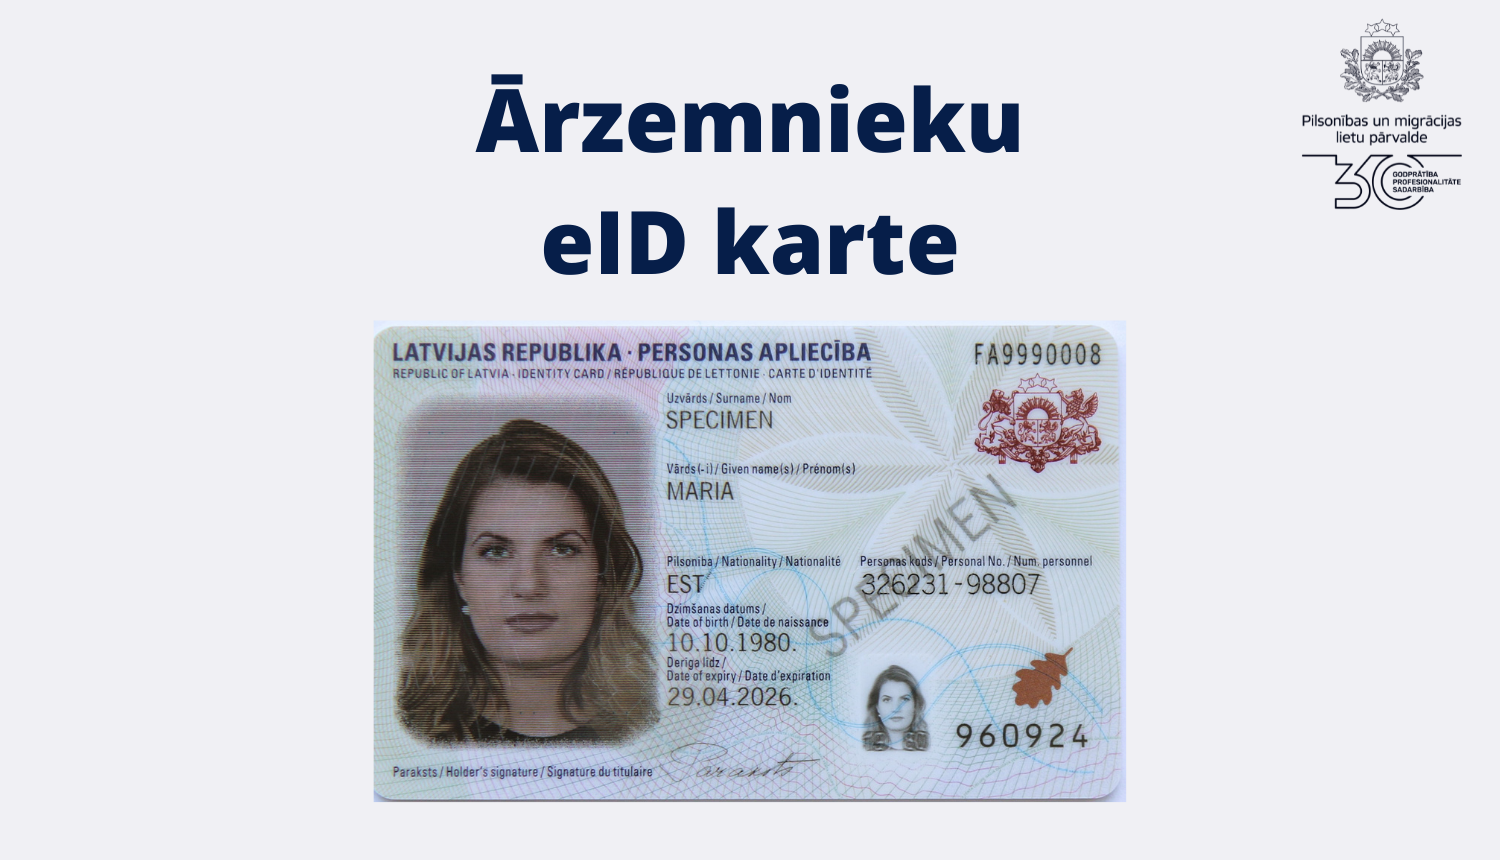 Foreigner eID card to be available in Latvia / Article